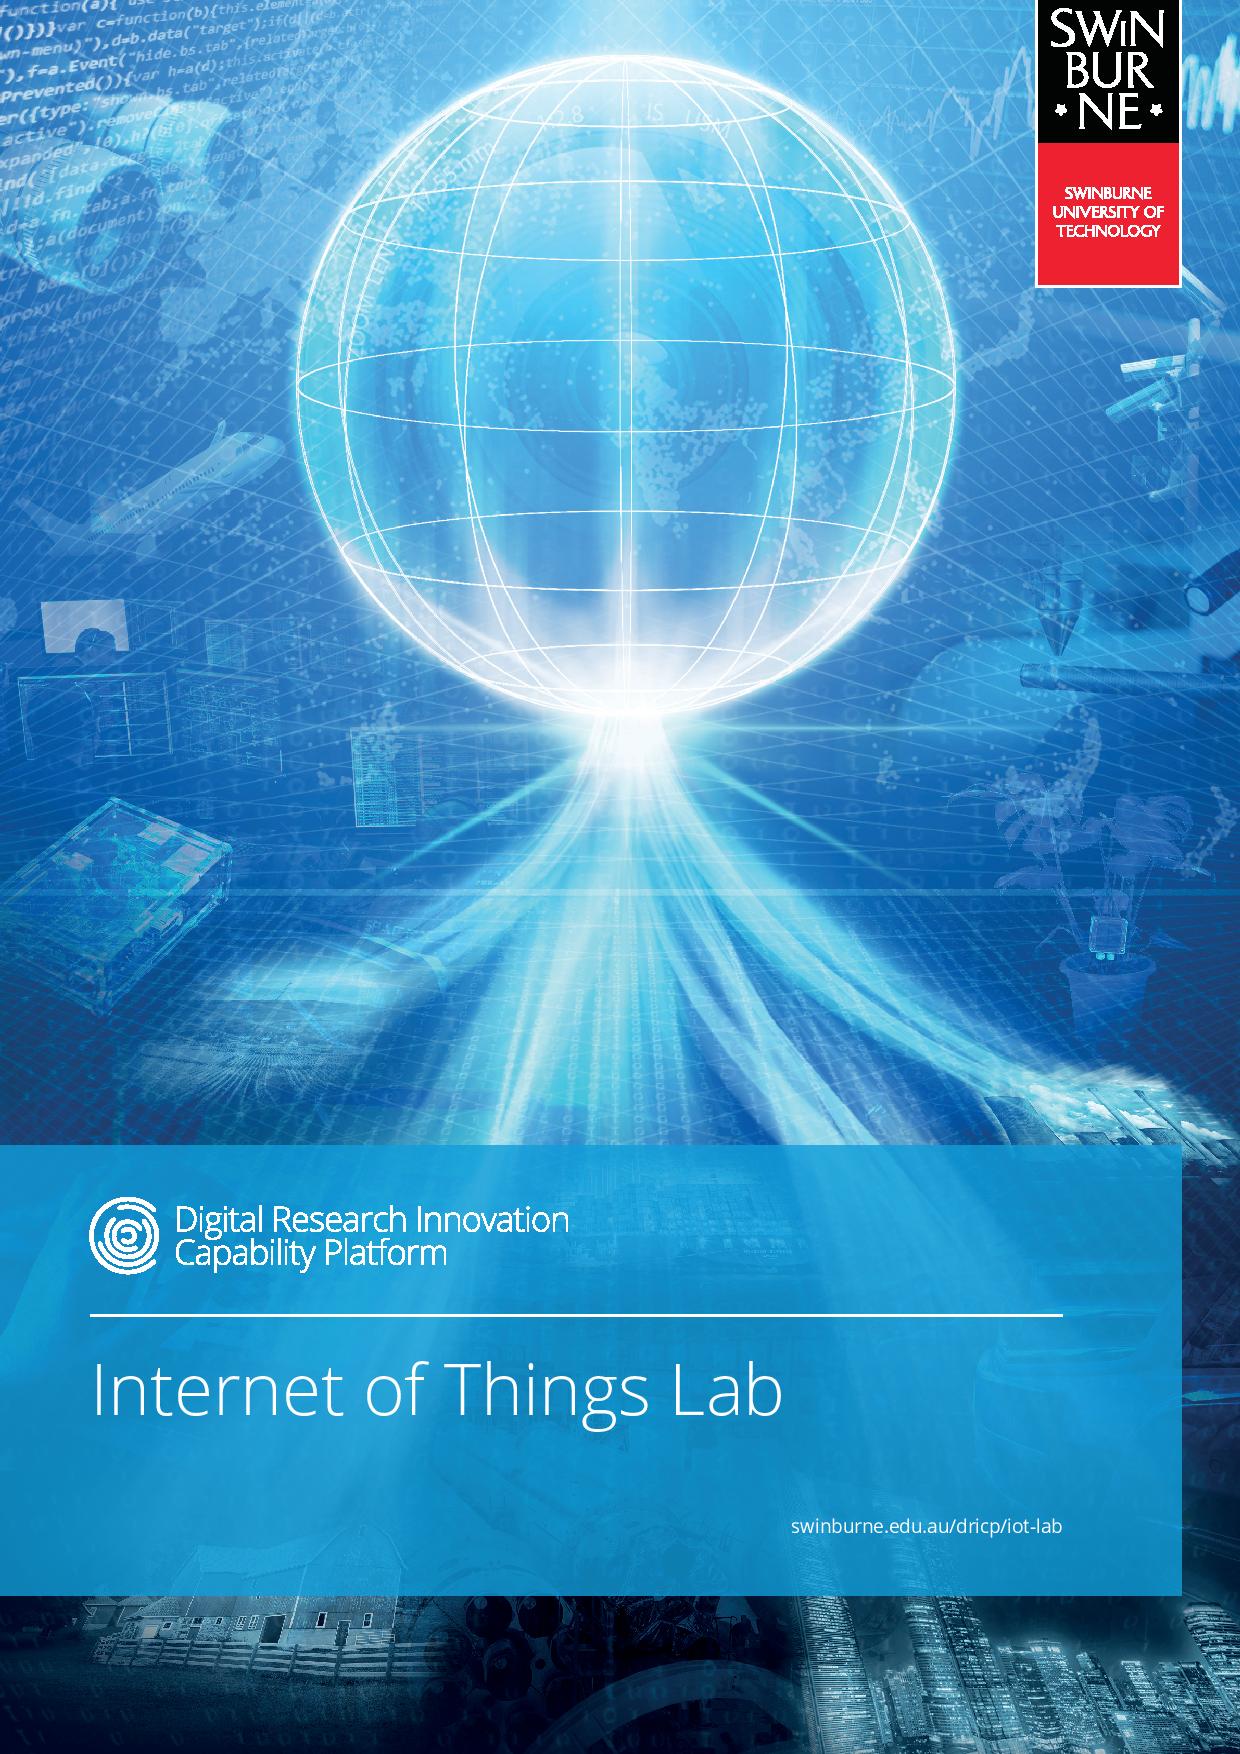 The Internet of Things (IoT) Lab